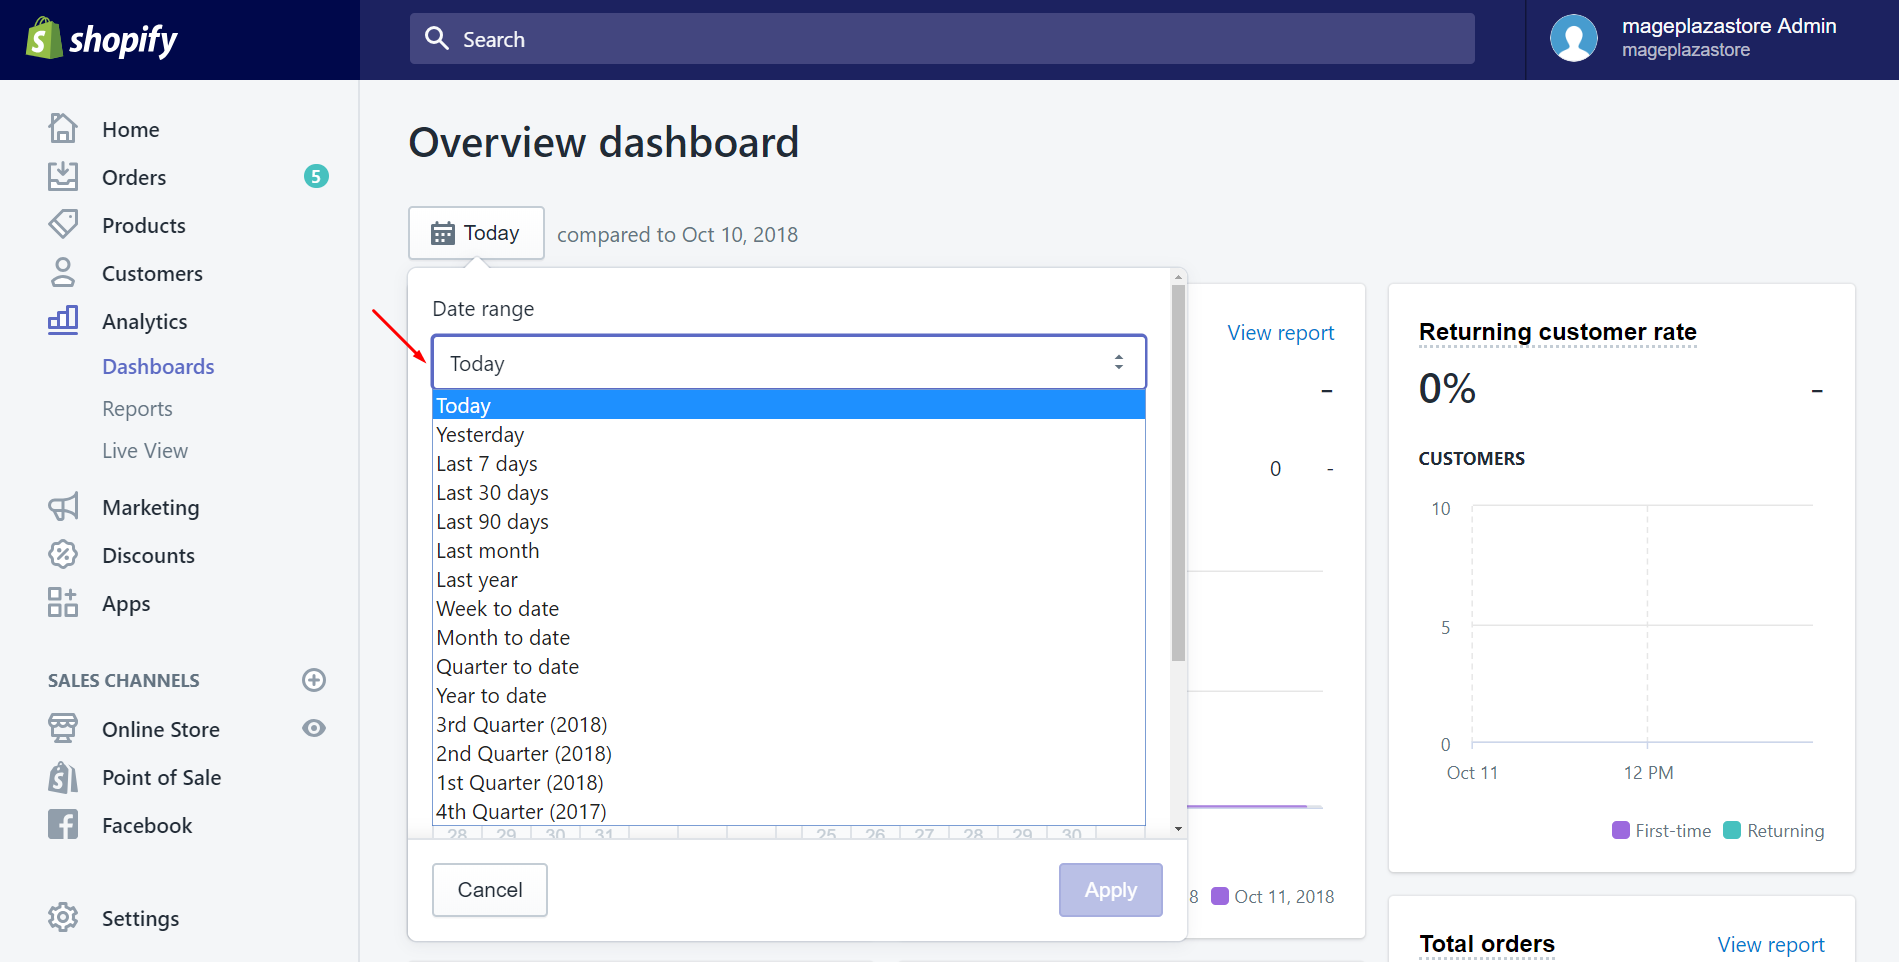 how to view the overview dashboard